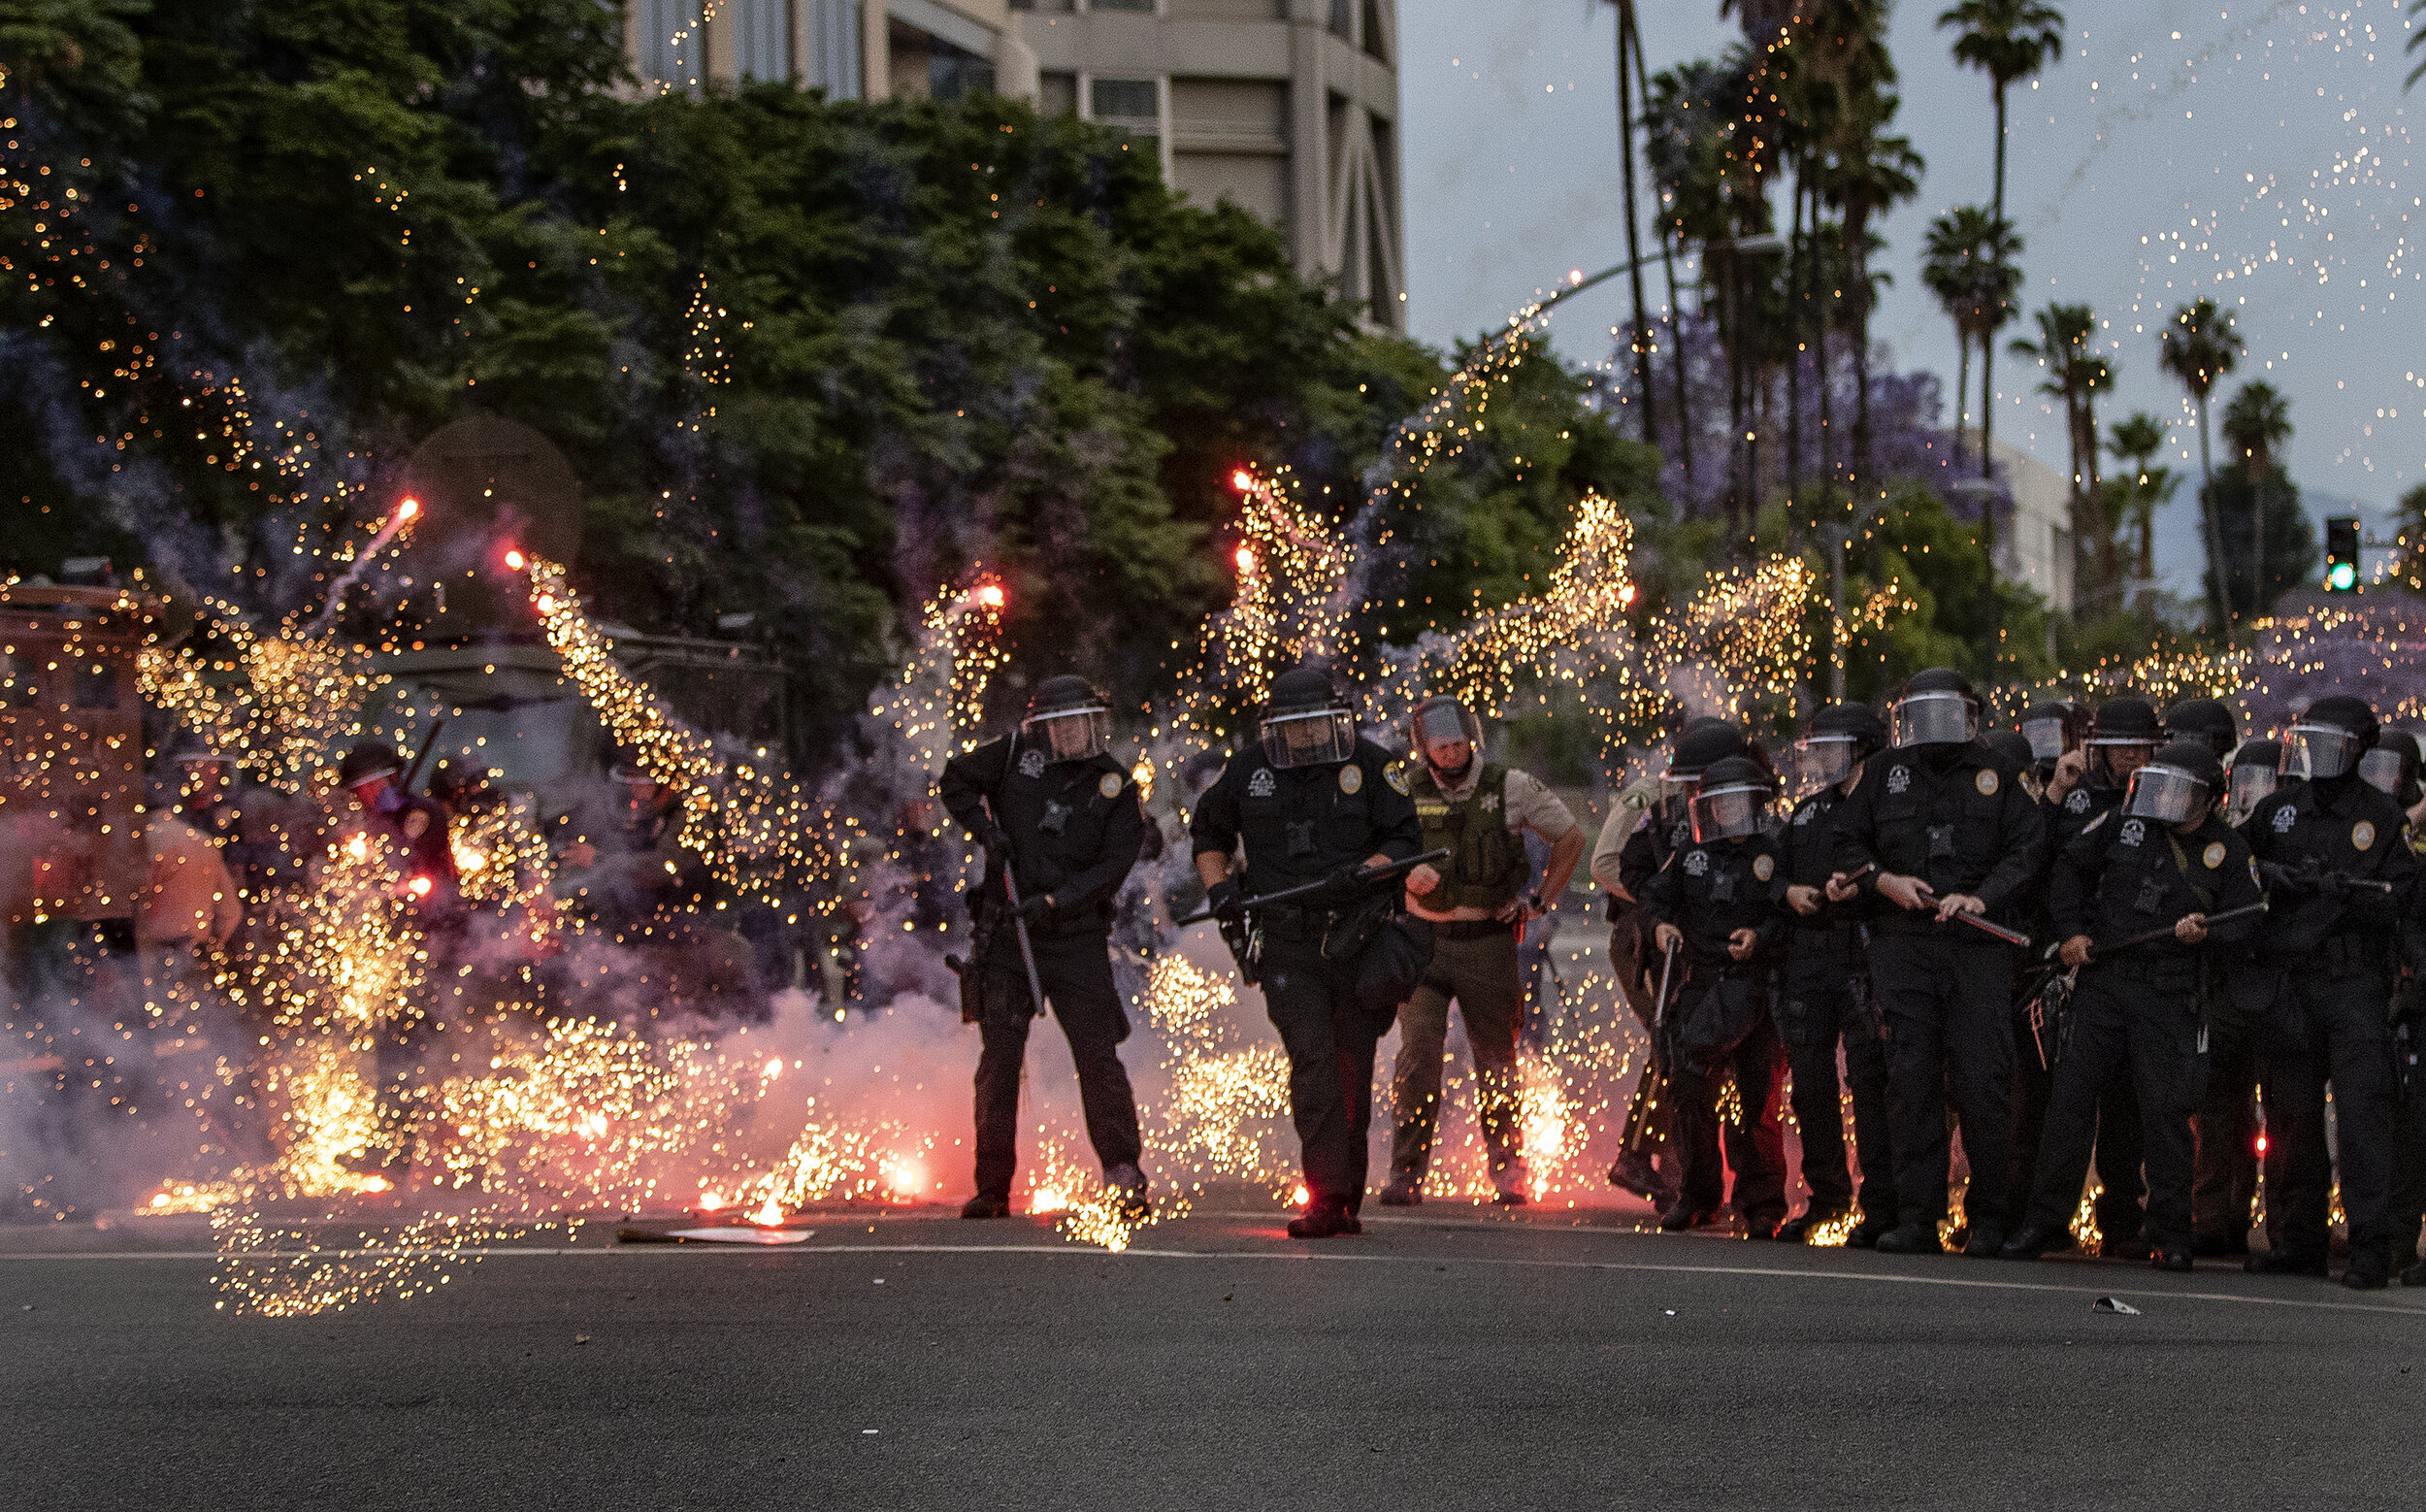  RIVERSIDE, CA - JUNE 1, 2020: Fireworks thrown by protesters explode at the feet of Riverside Police officers during a demonstration against the death of George Floyd during the coronavirus pandemic on June 1, 2020 in Riverside, California. Thousand